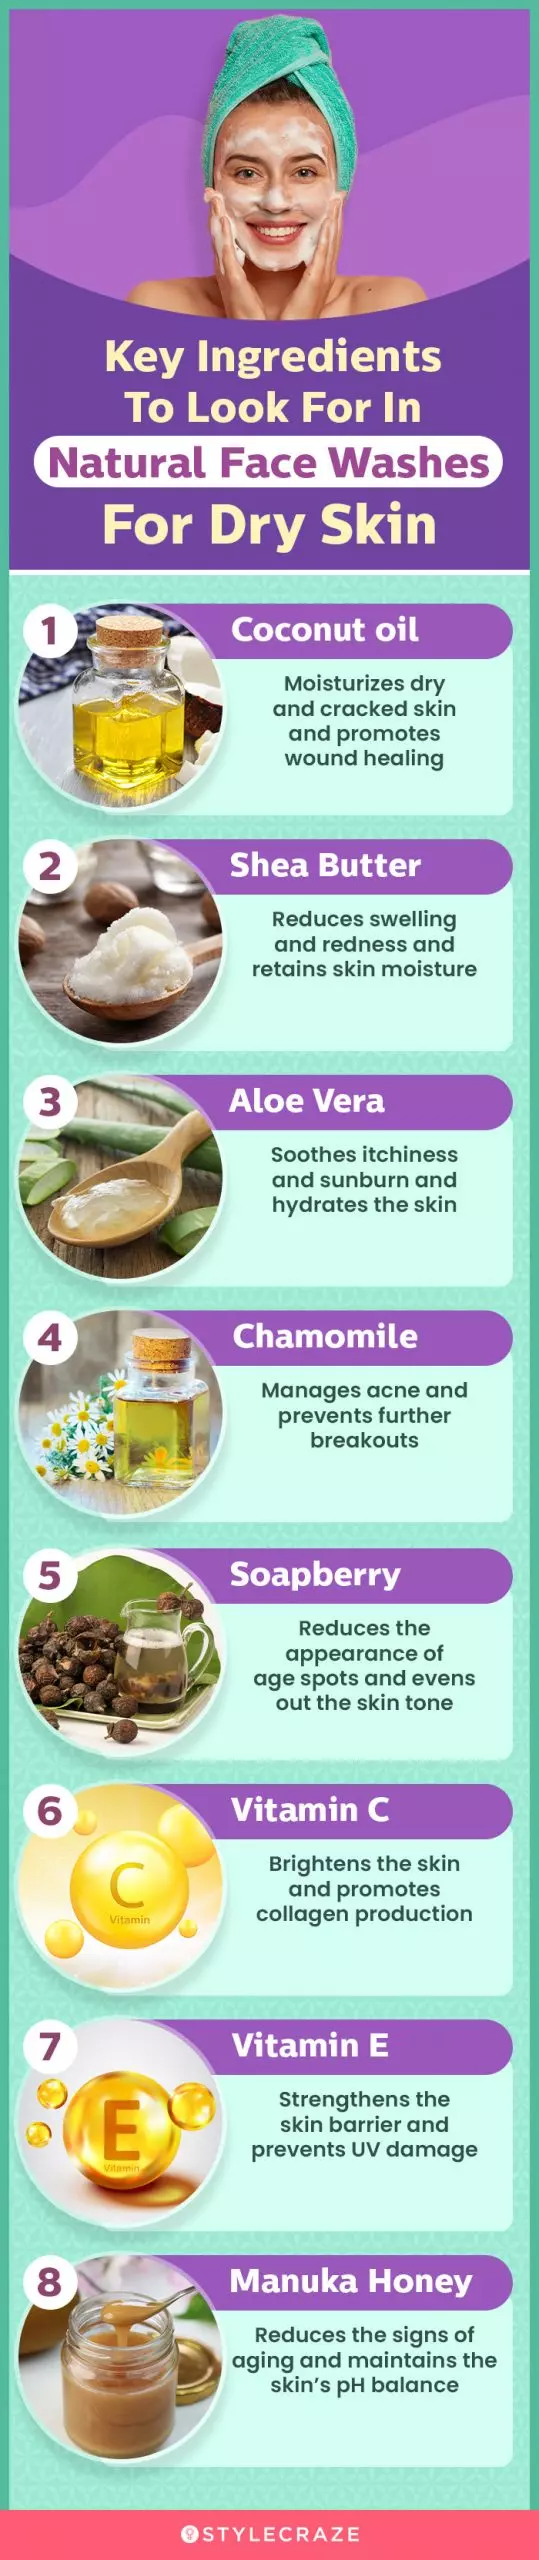 Key Ingredients To Look For In Natural Face Washes For Dry Skin (infographic)